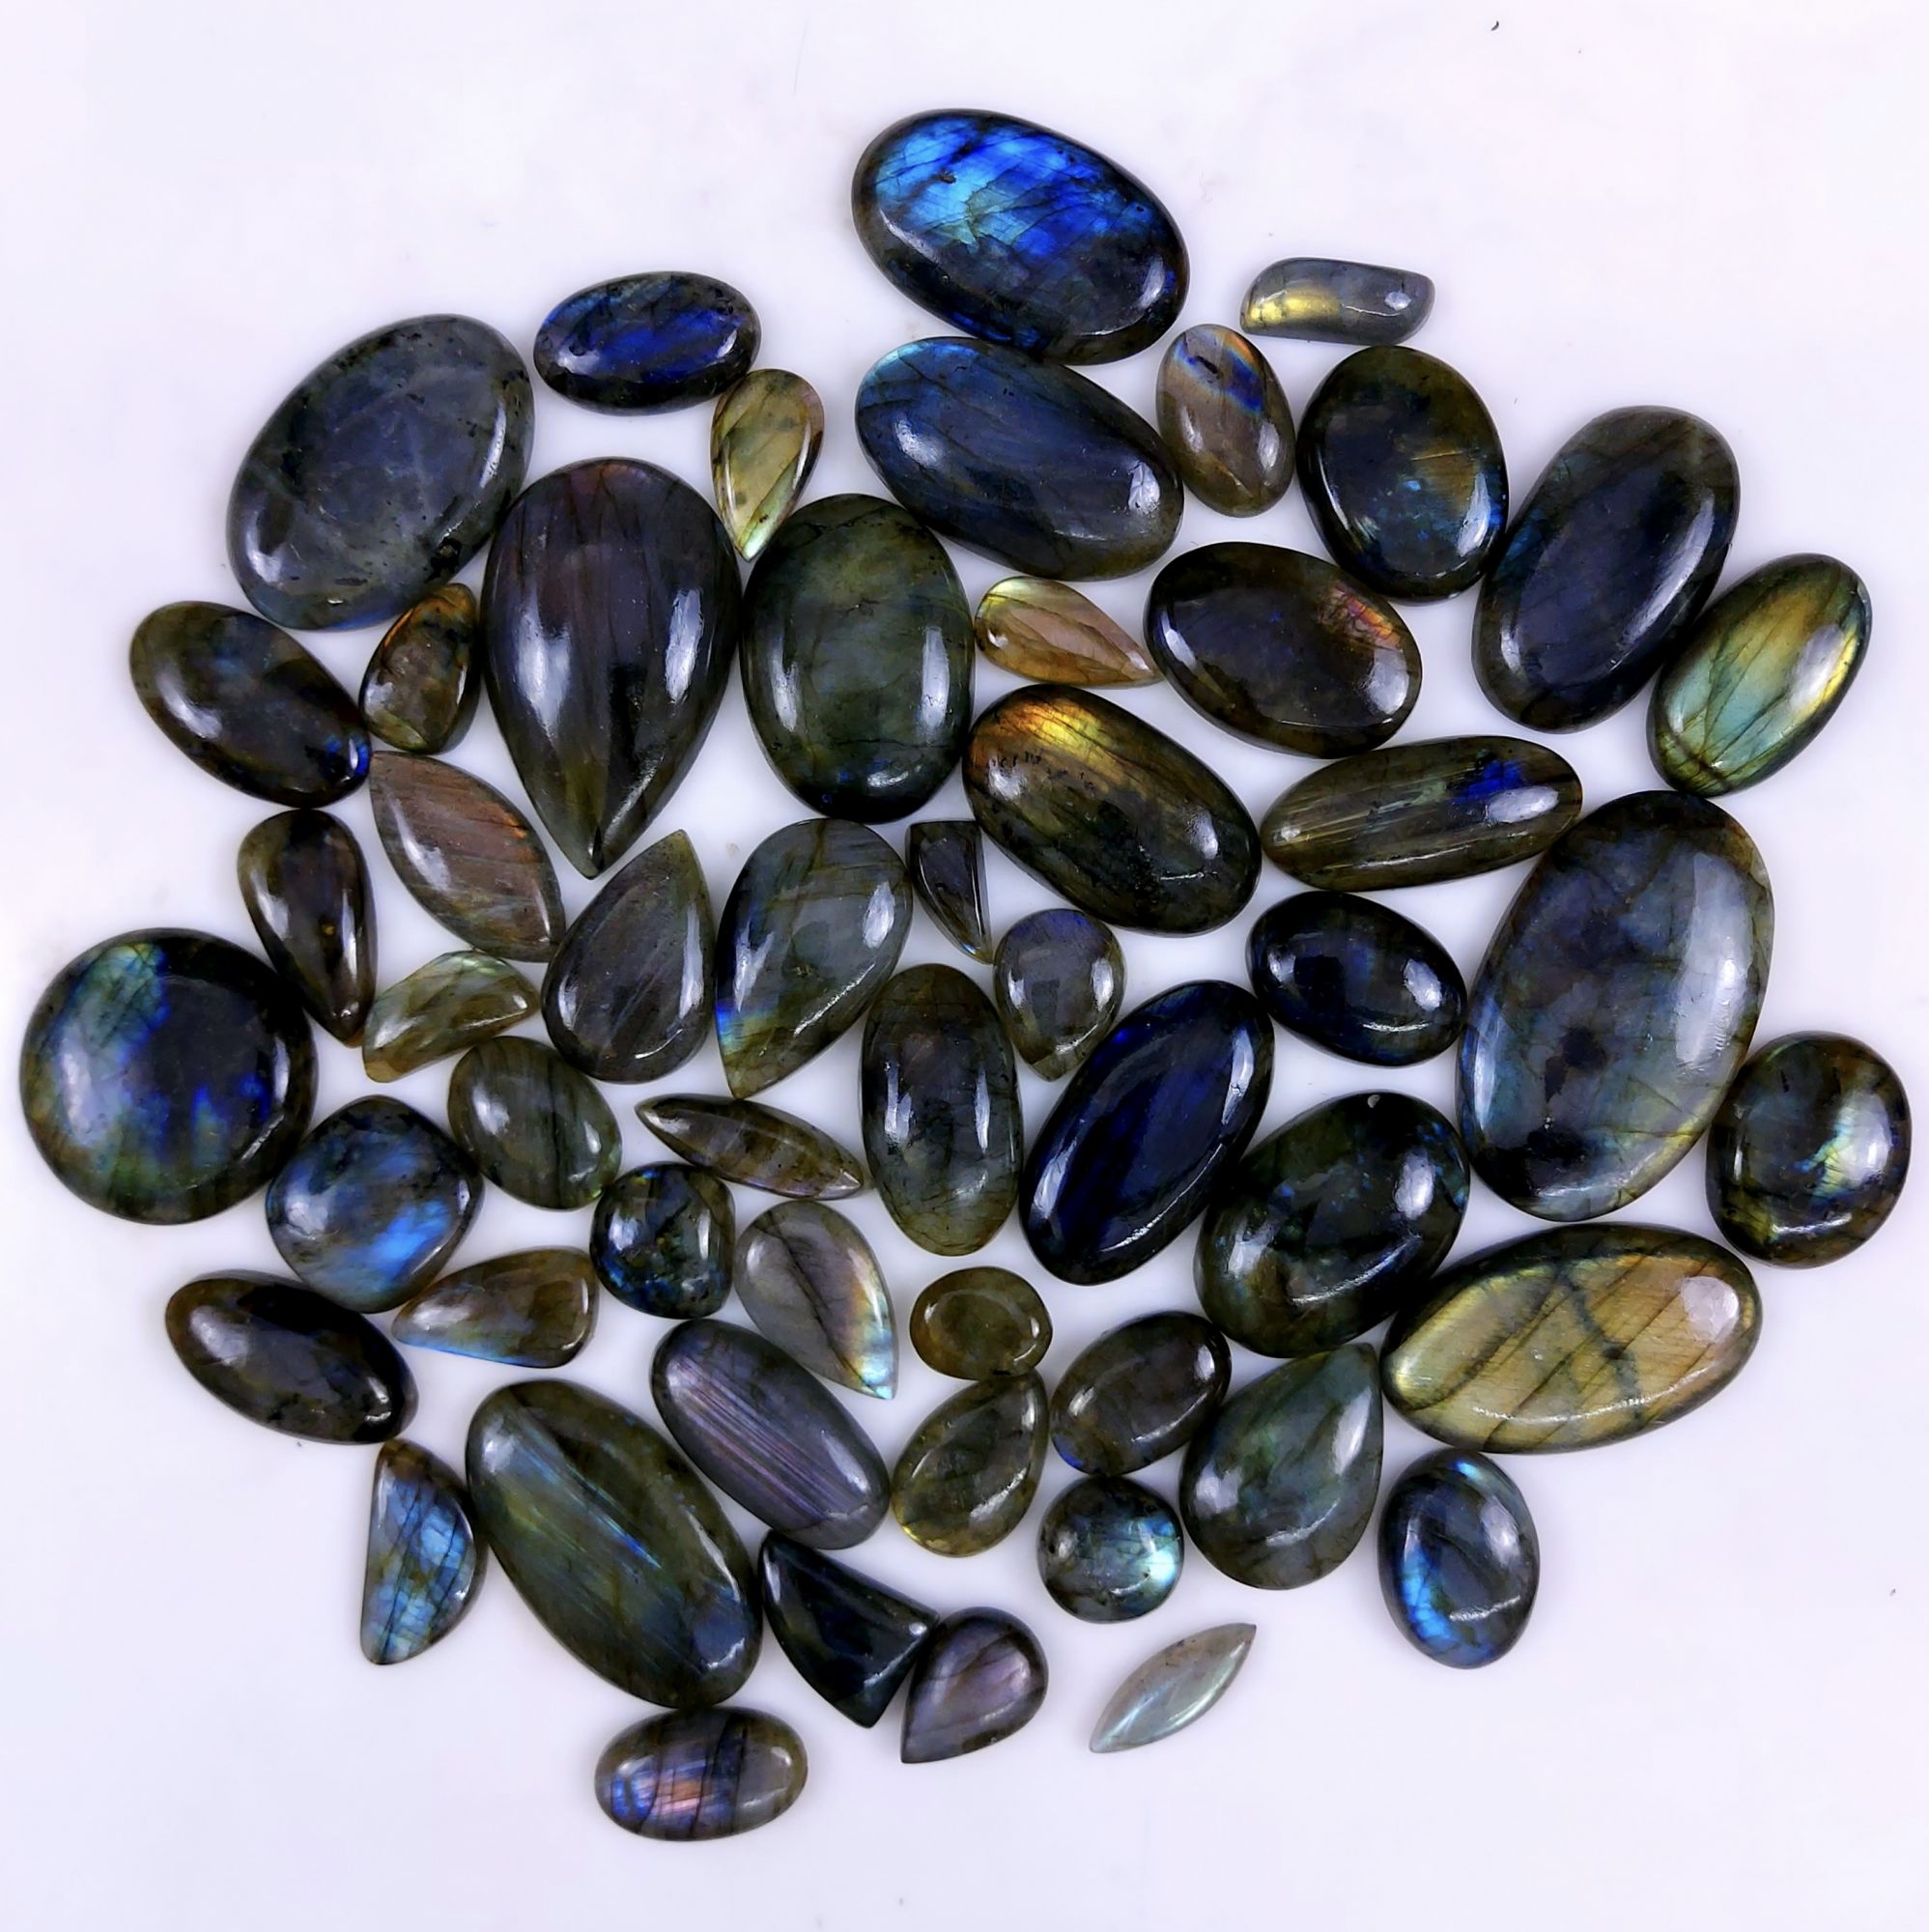 53pc 1702Cts Labradorite Cabochon Multifire Healing Crystal For Jewelry Supplies, Labradorite Necklace Handmade Wire Wrapped Gemstone Pendant 50x30 15x12mm#6360